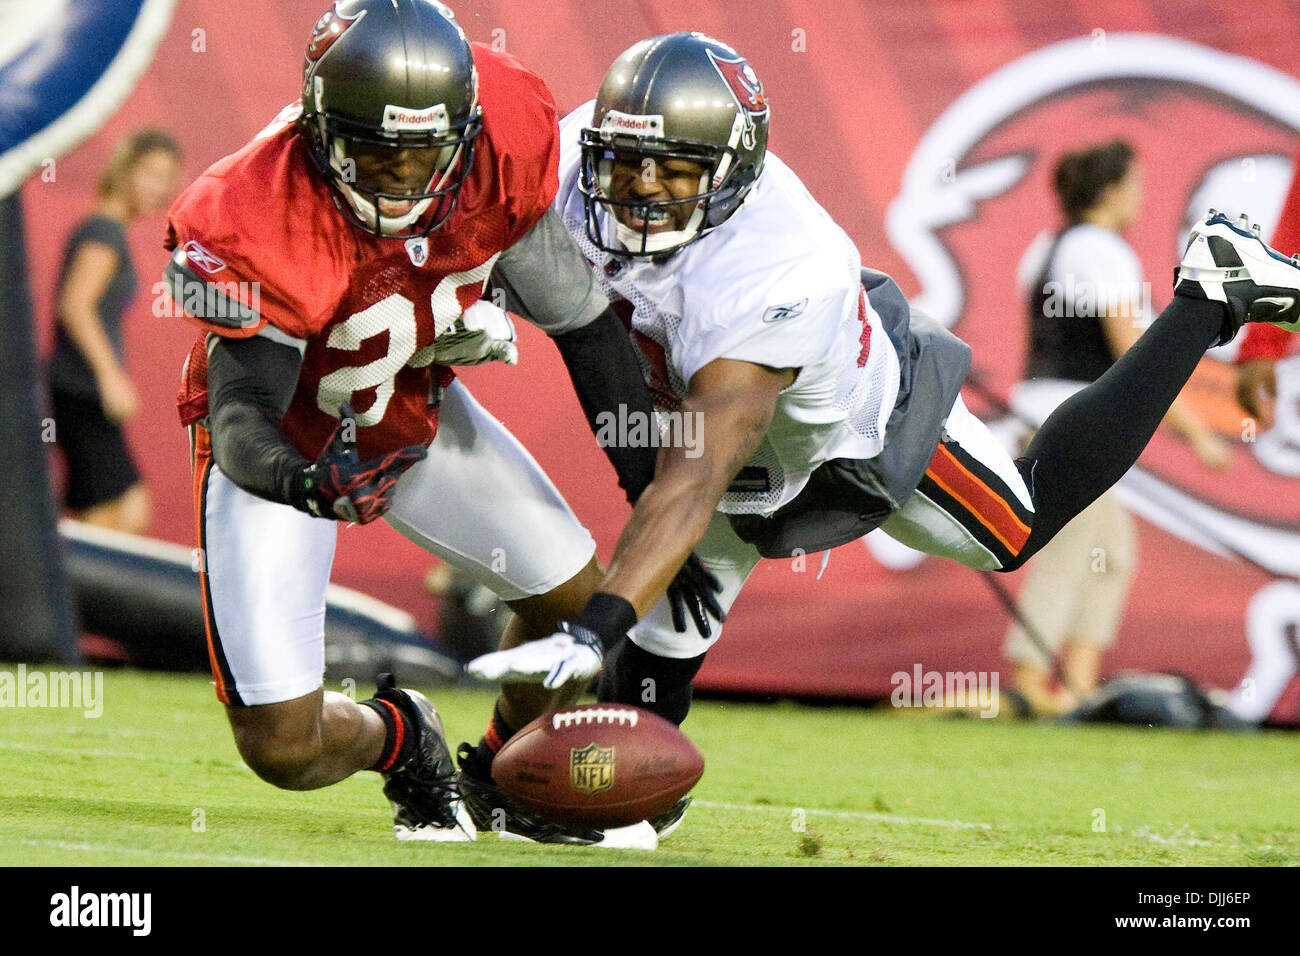 August 7, 2010: Tampa Buccaneers CR RHONDE BARBER (#20) breaks up a pass to WR MICHAEL CLAYTON during night training camp team drills at the Raymond James Stadium in Tampa, Florida. (Credit Image: © Anthony Smith/Southcreek Global/ZUMApress.com) Stock Photo